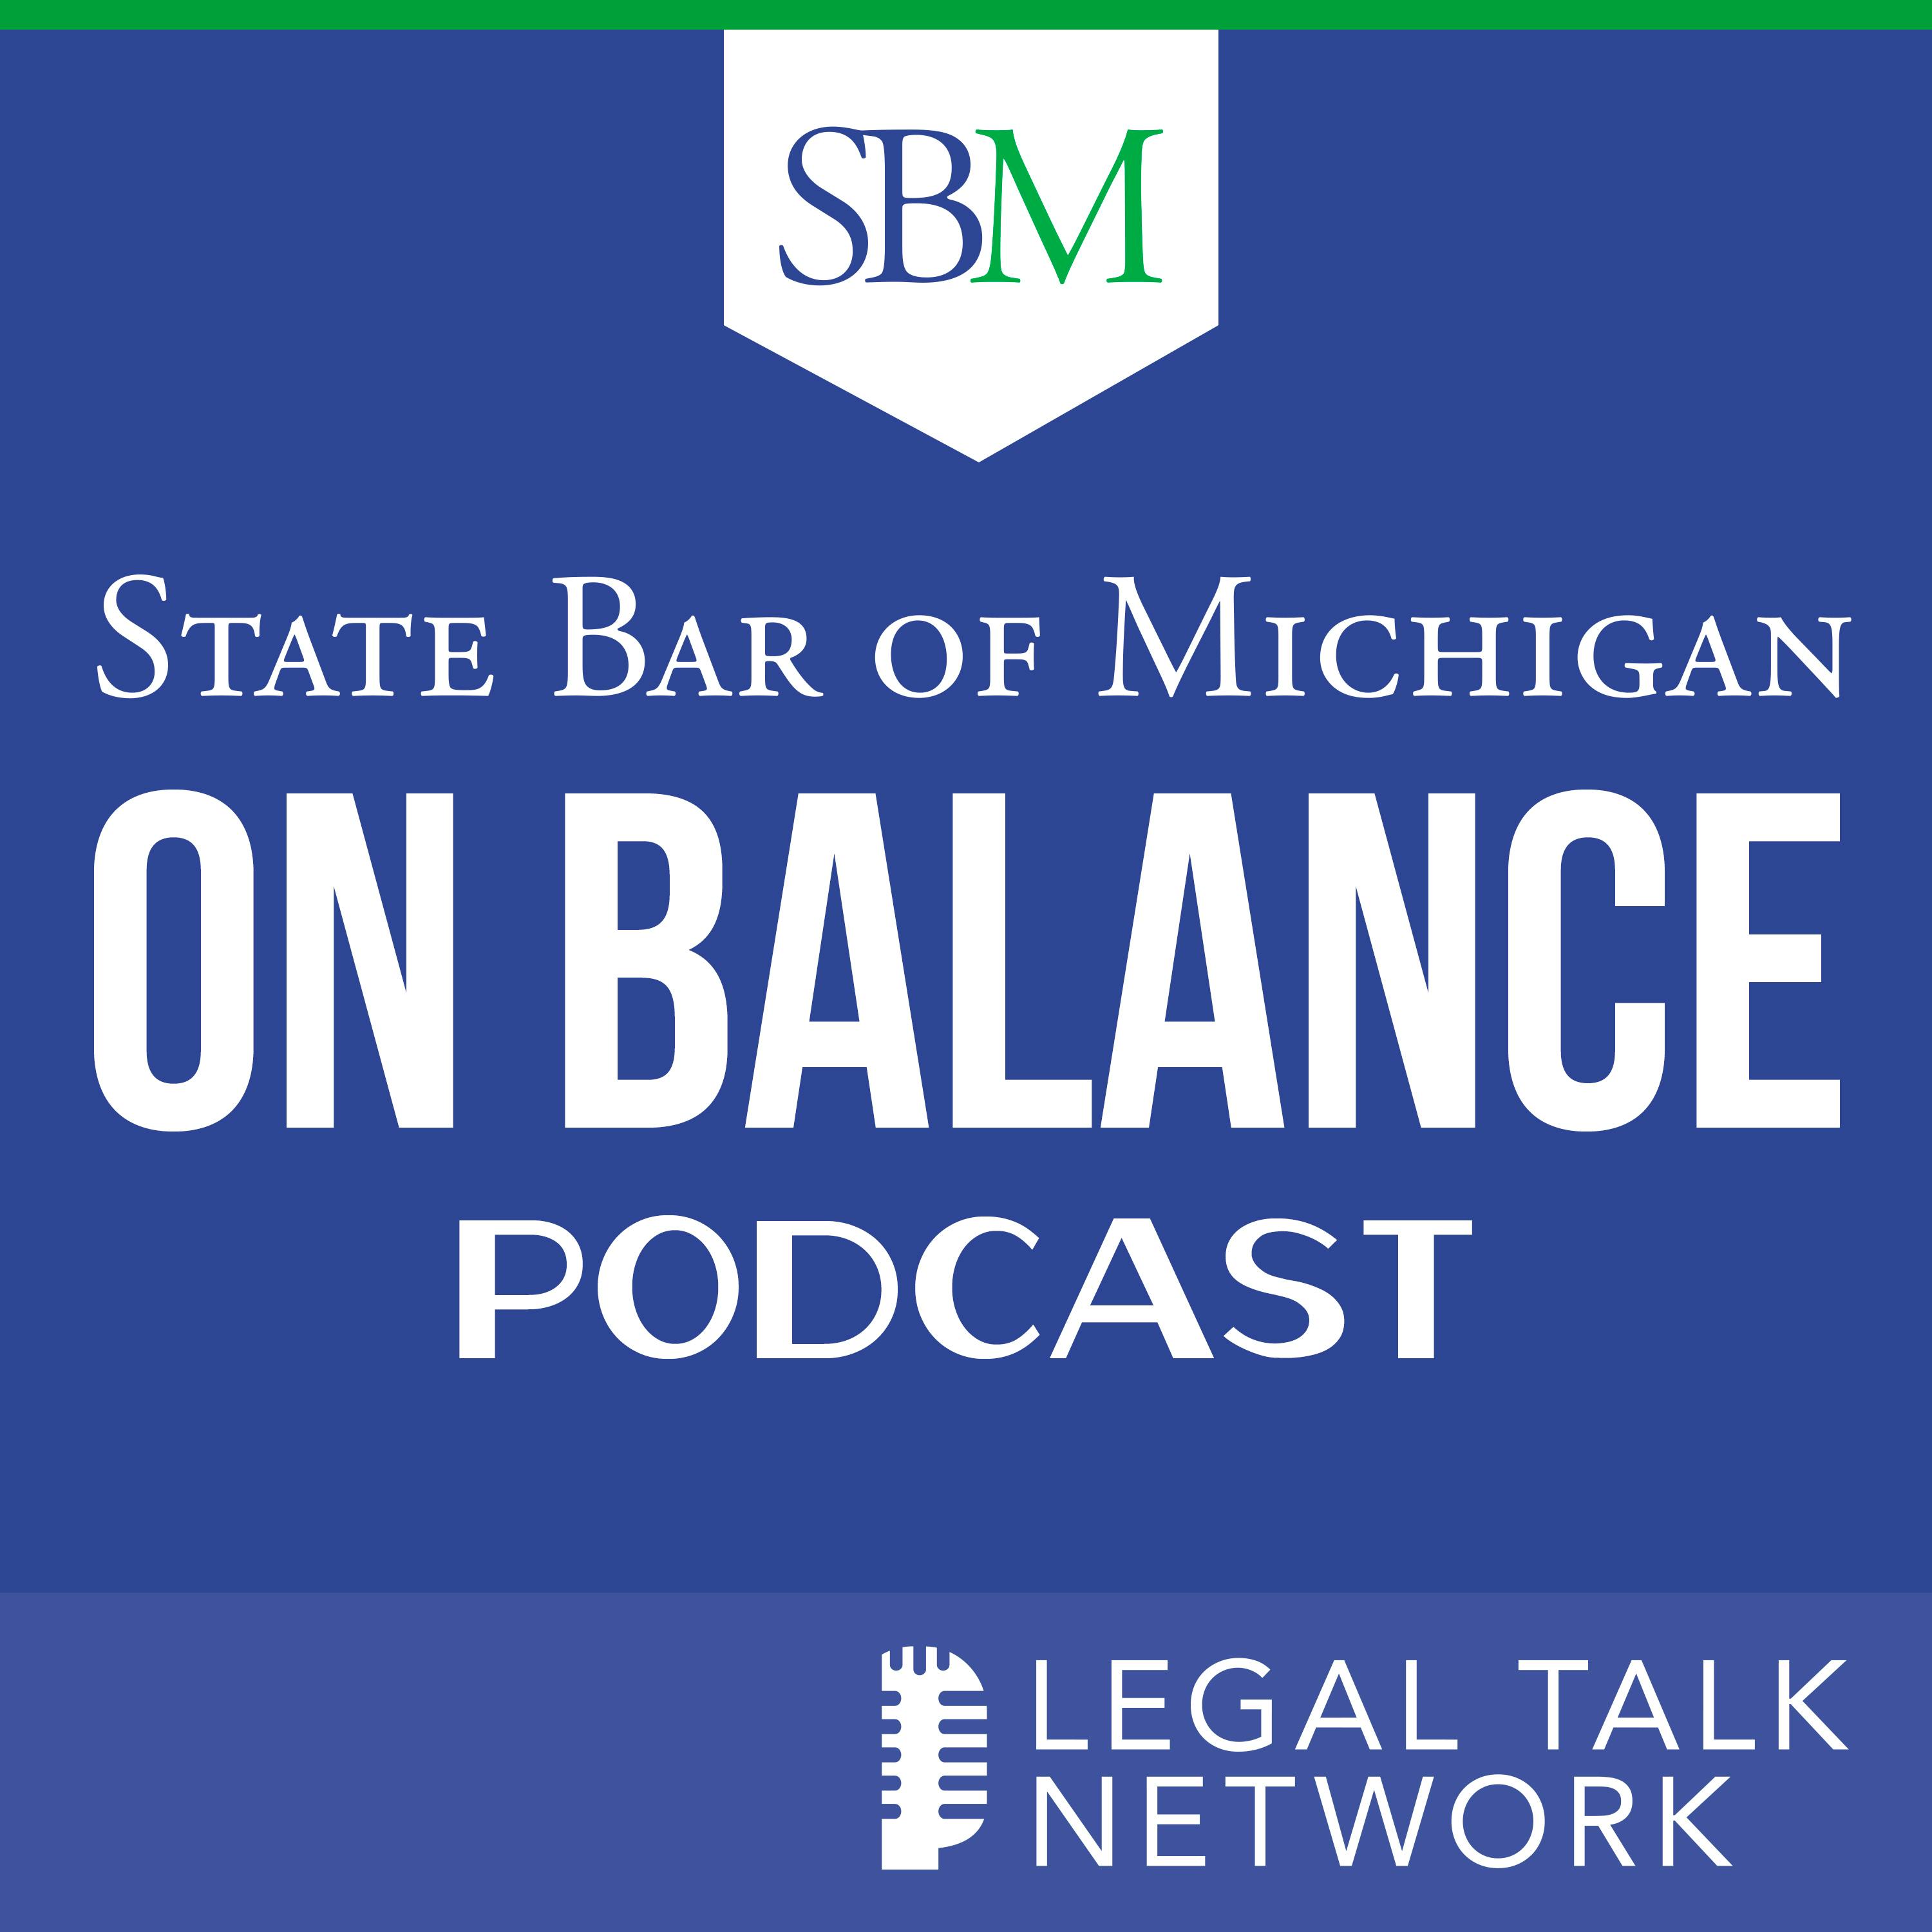 The SOLACE Program — Helping Michigan’s Legal Professionals and Law Students